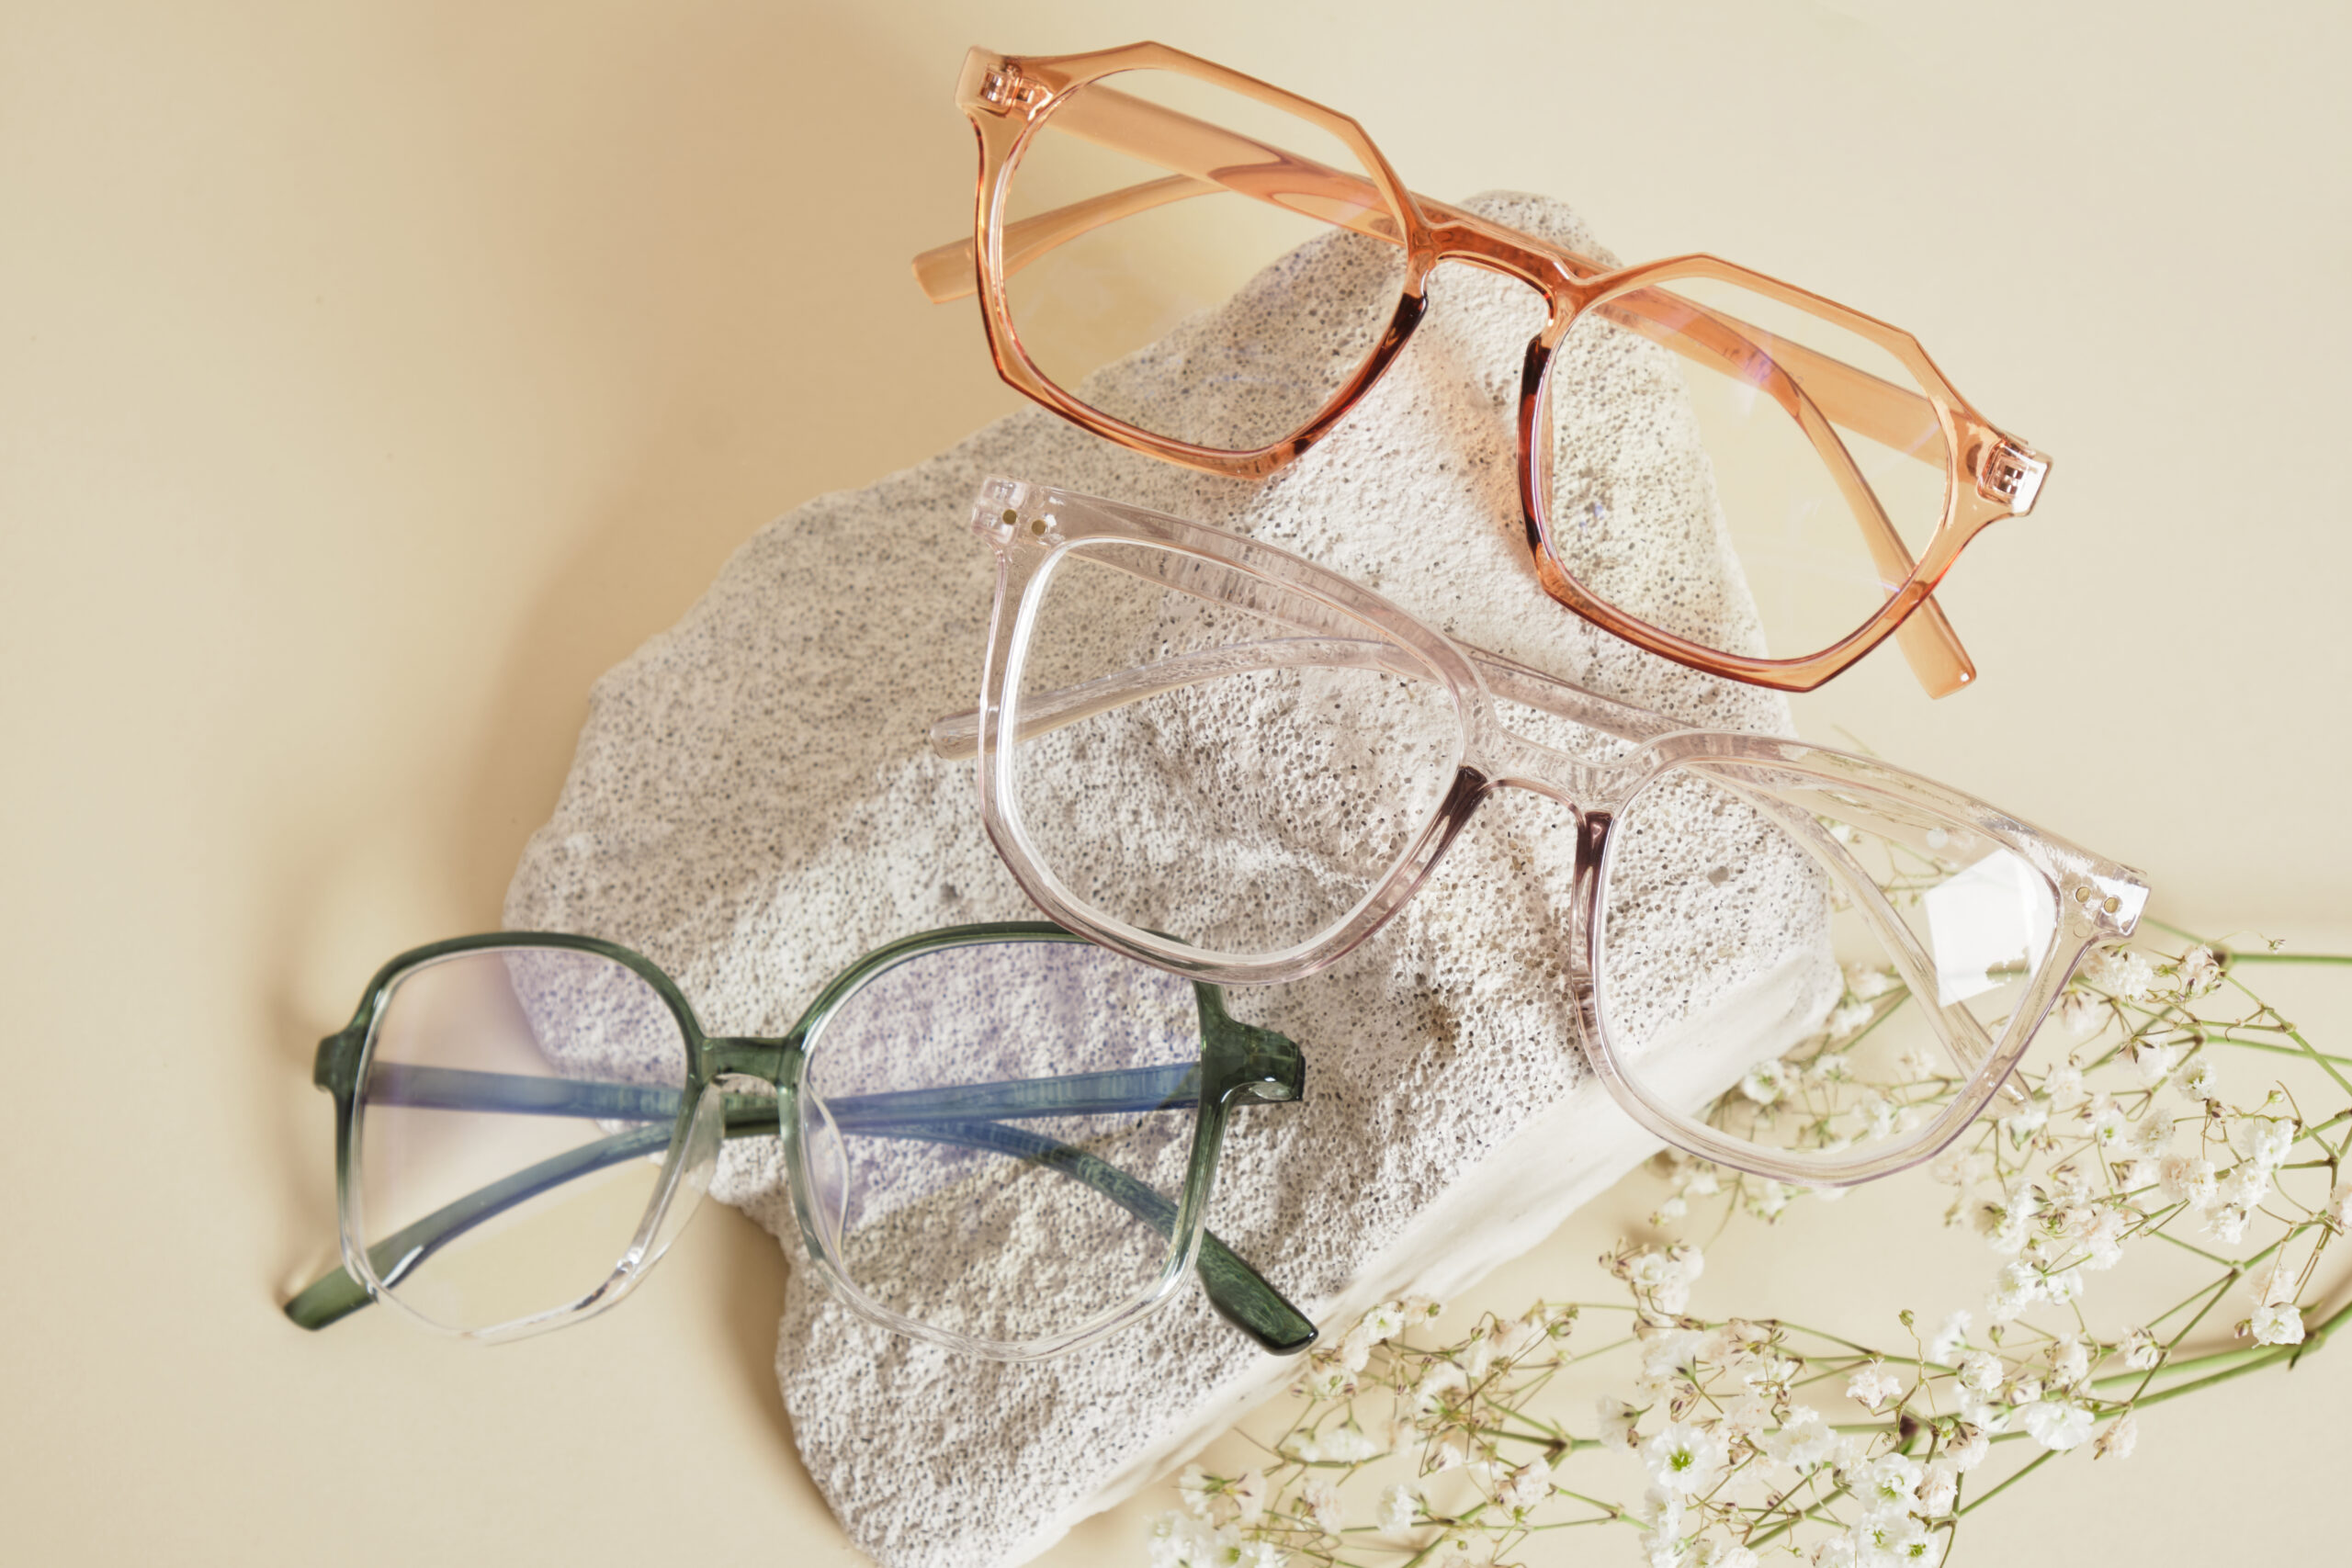 Inspiring ideas of what to do with your old glasses